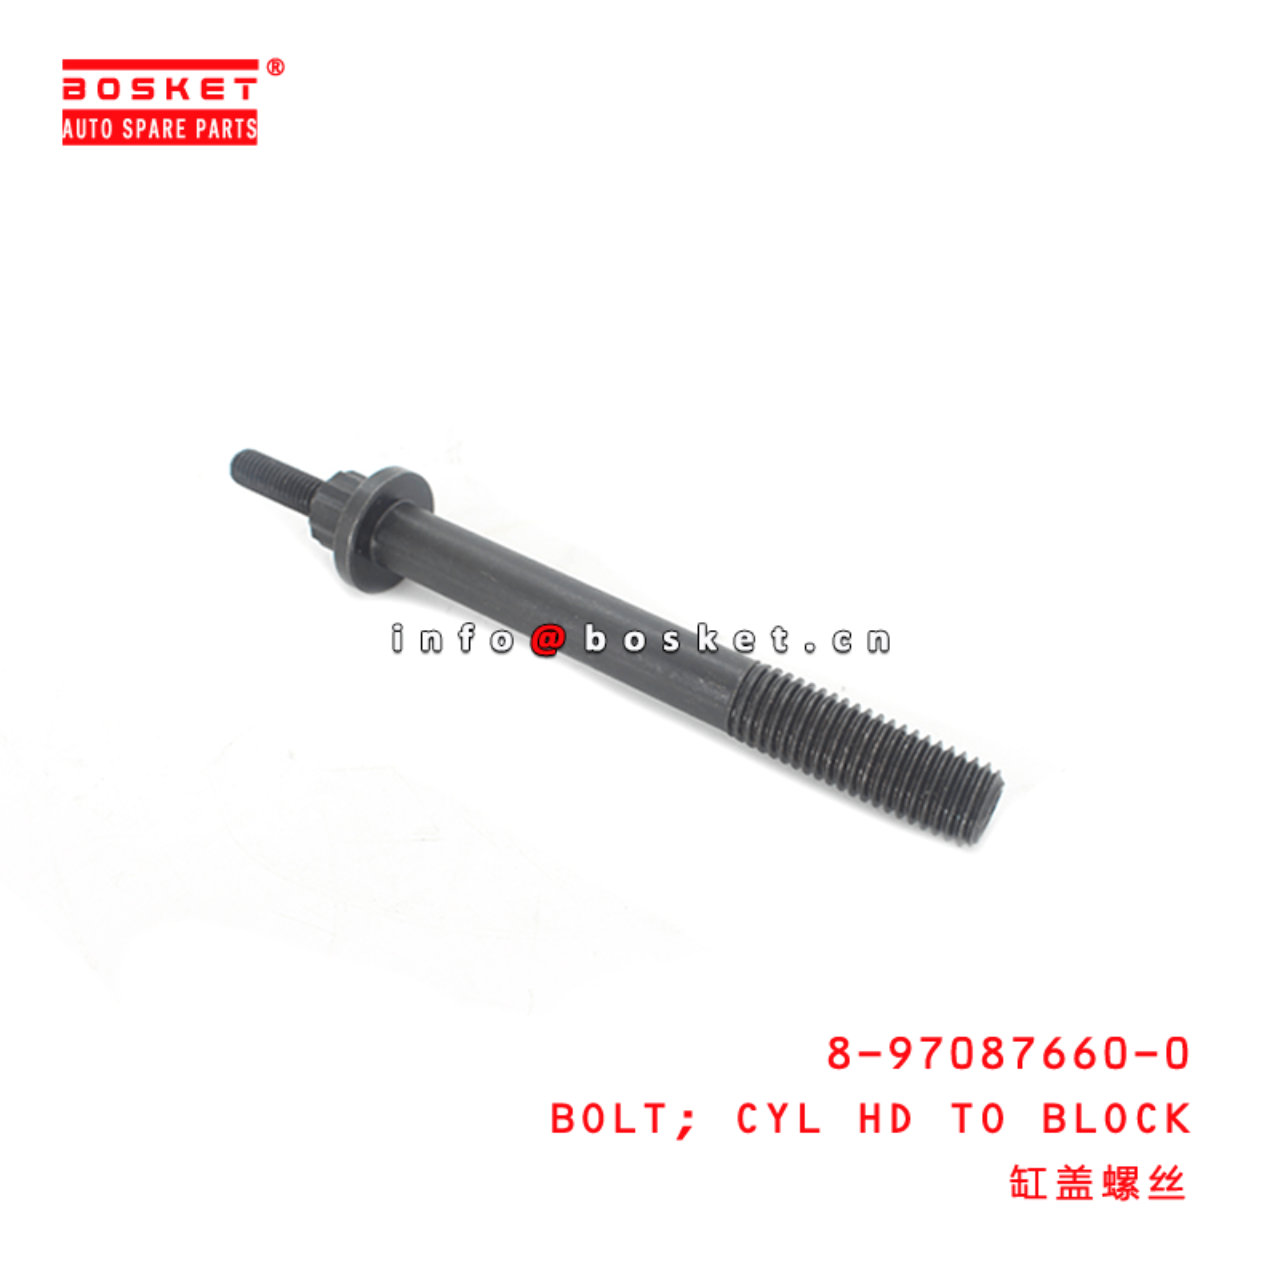 8-97087660-0 Cylinder Head To Block Bolt 8970876600 Suitable for ISUZU XD 4HE1